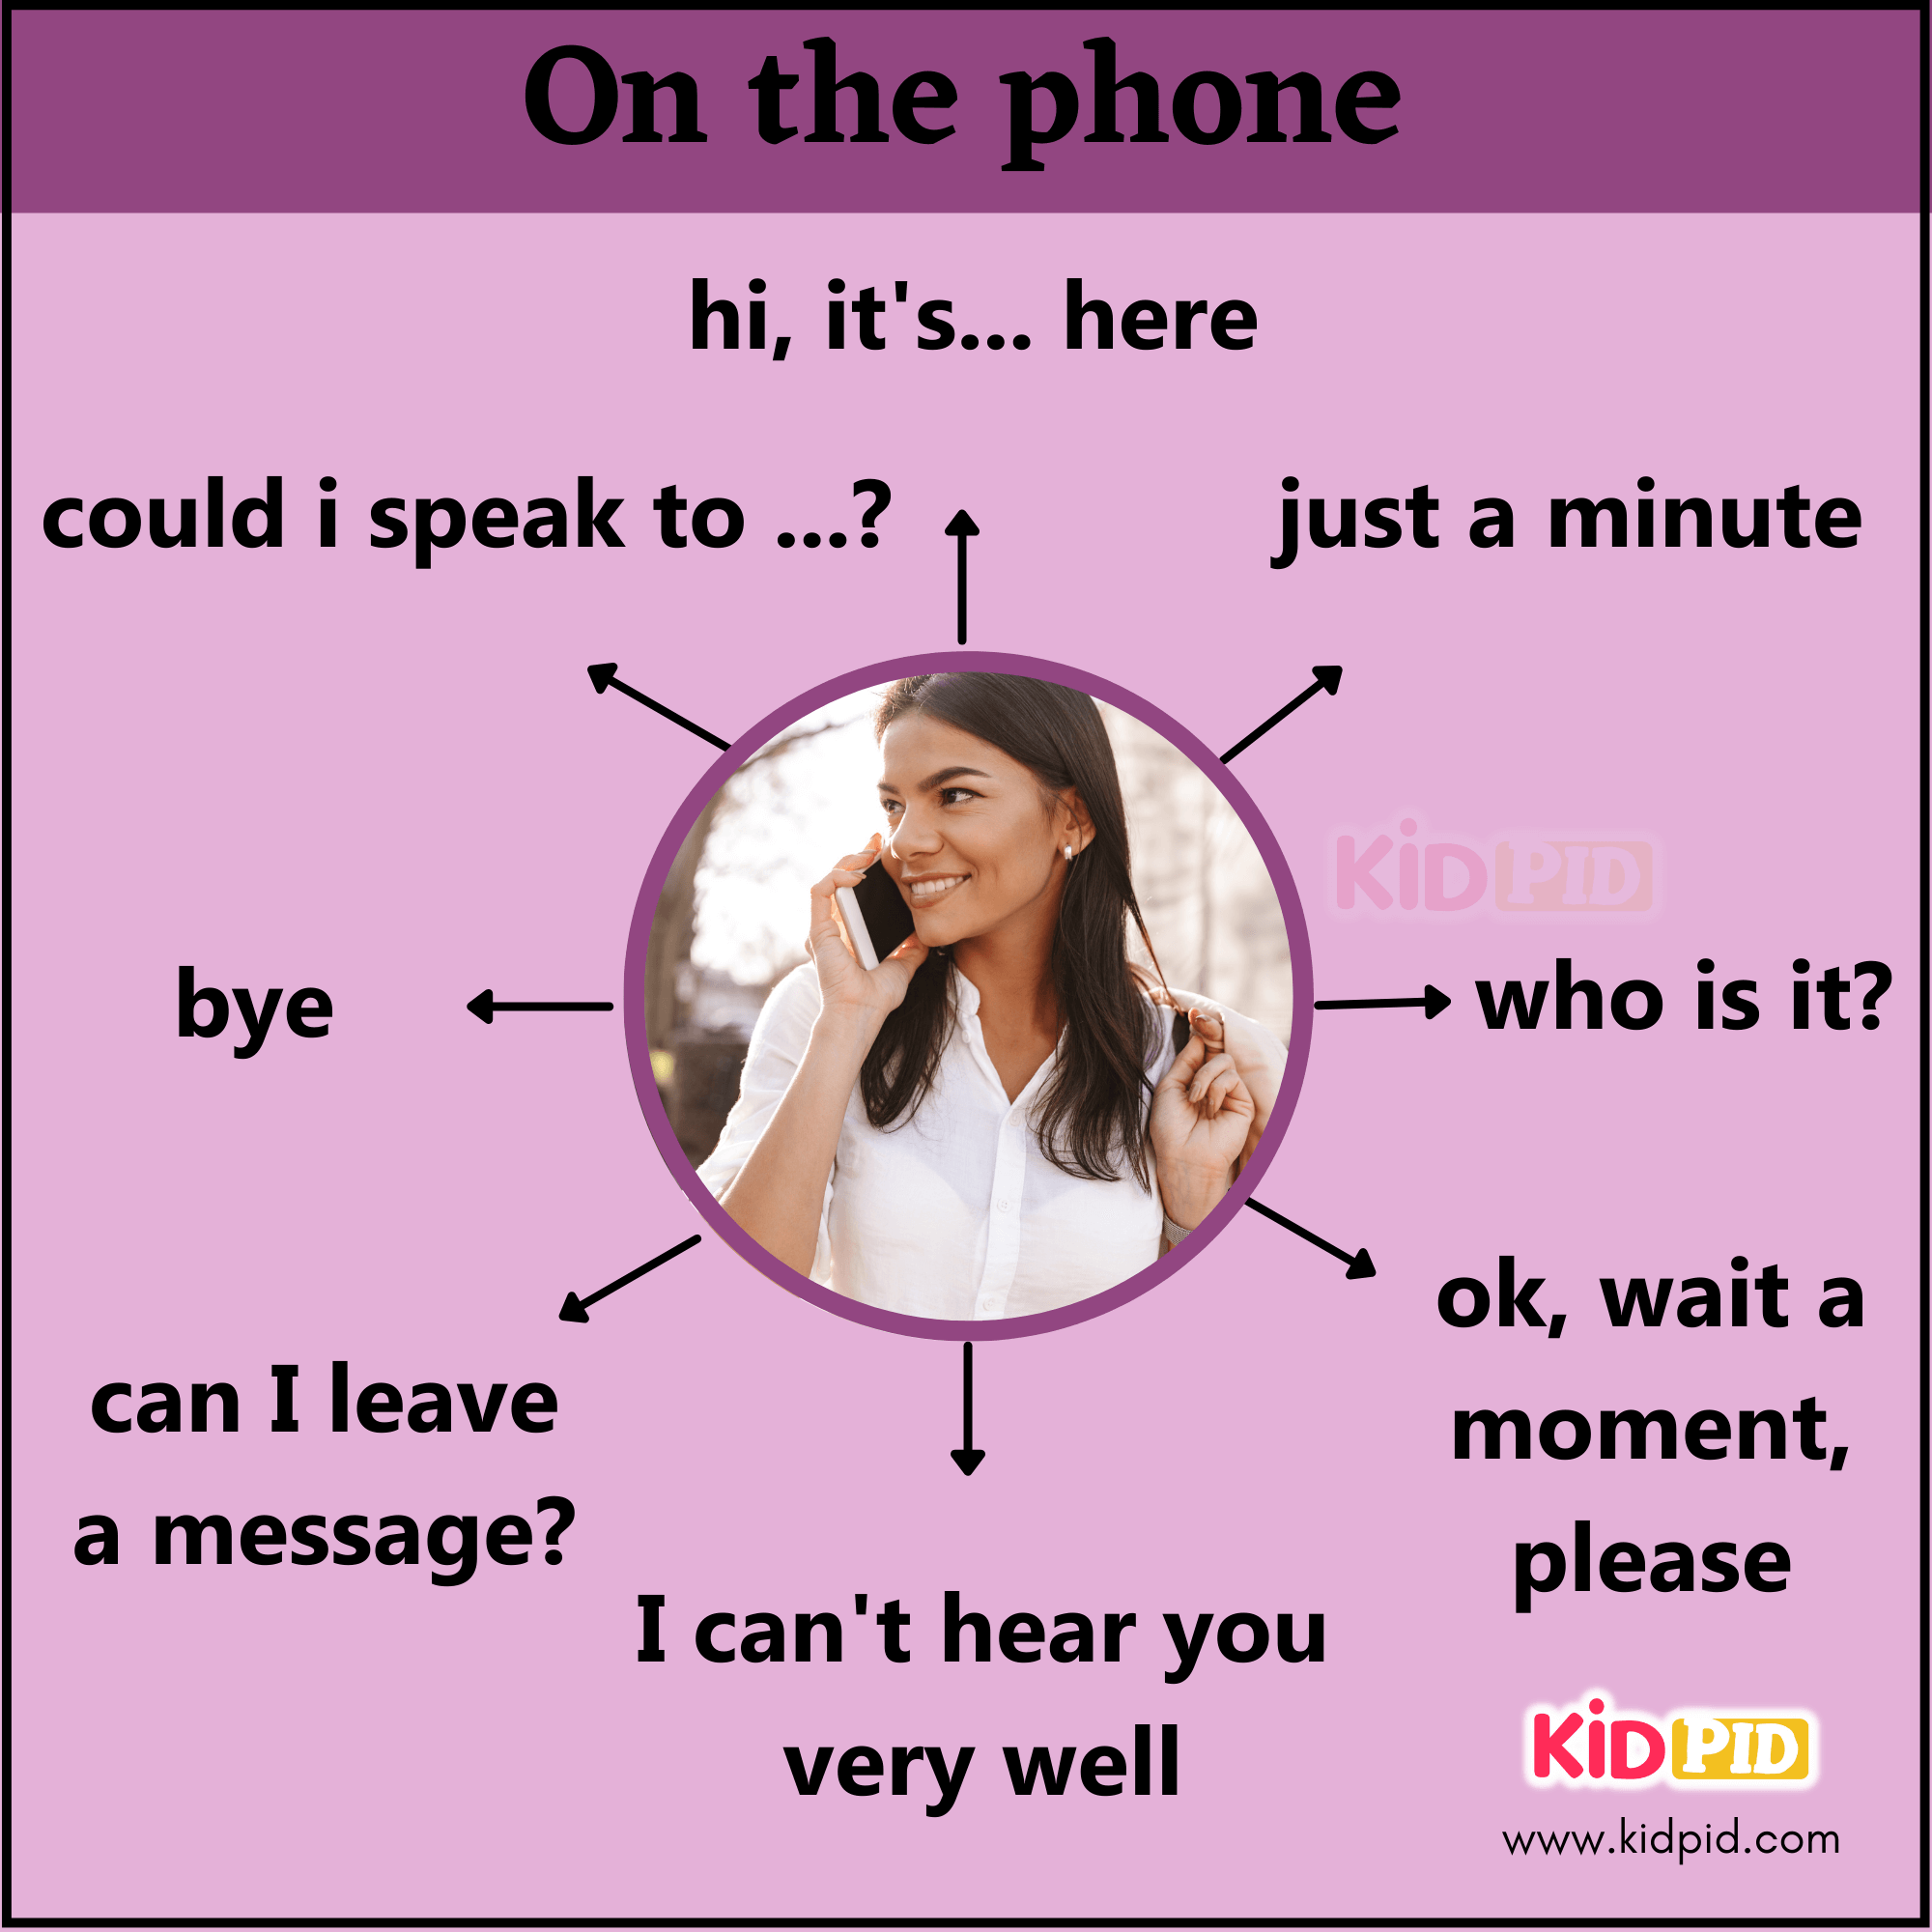 On The Phone - Important Daily Vocabulary and Conversation